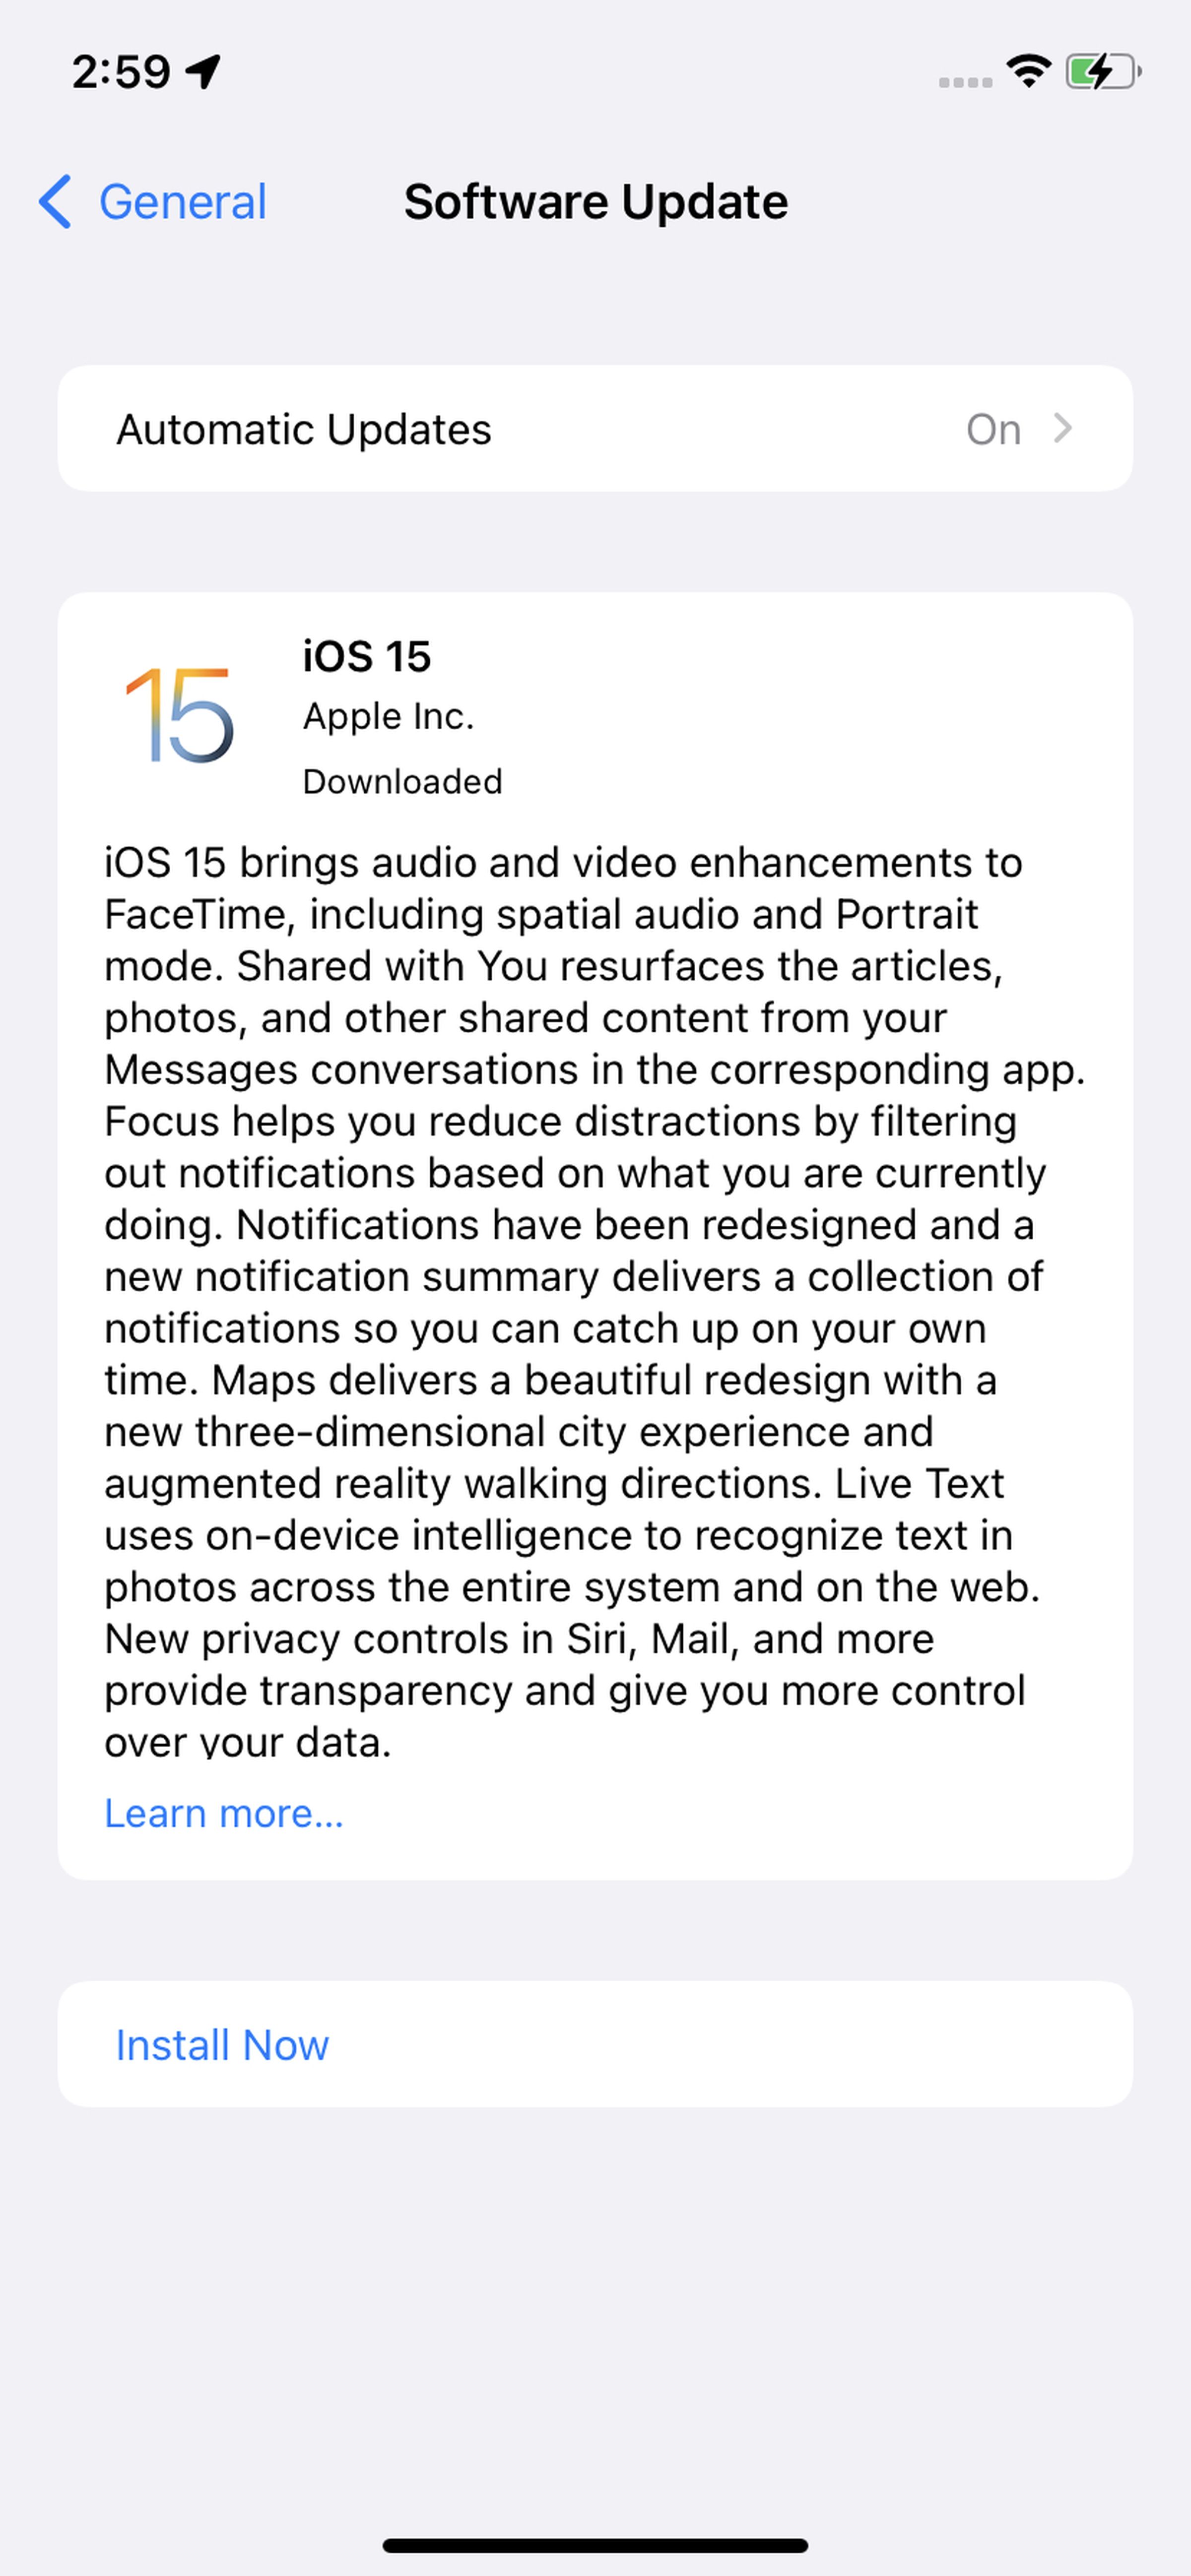 Your update to iOS 15 may be waiting for you.